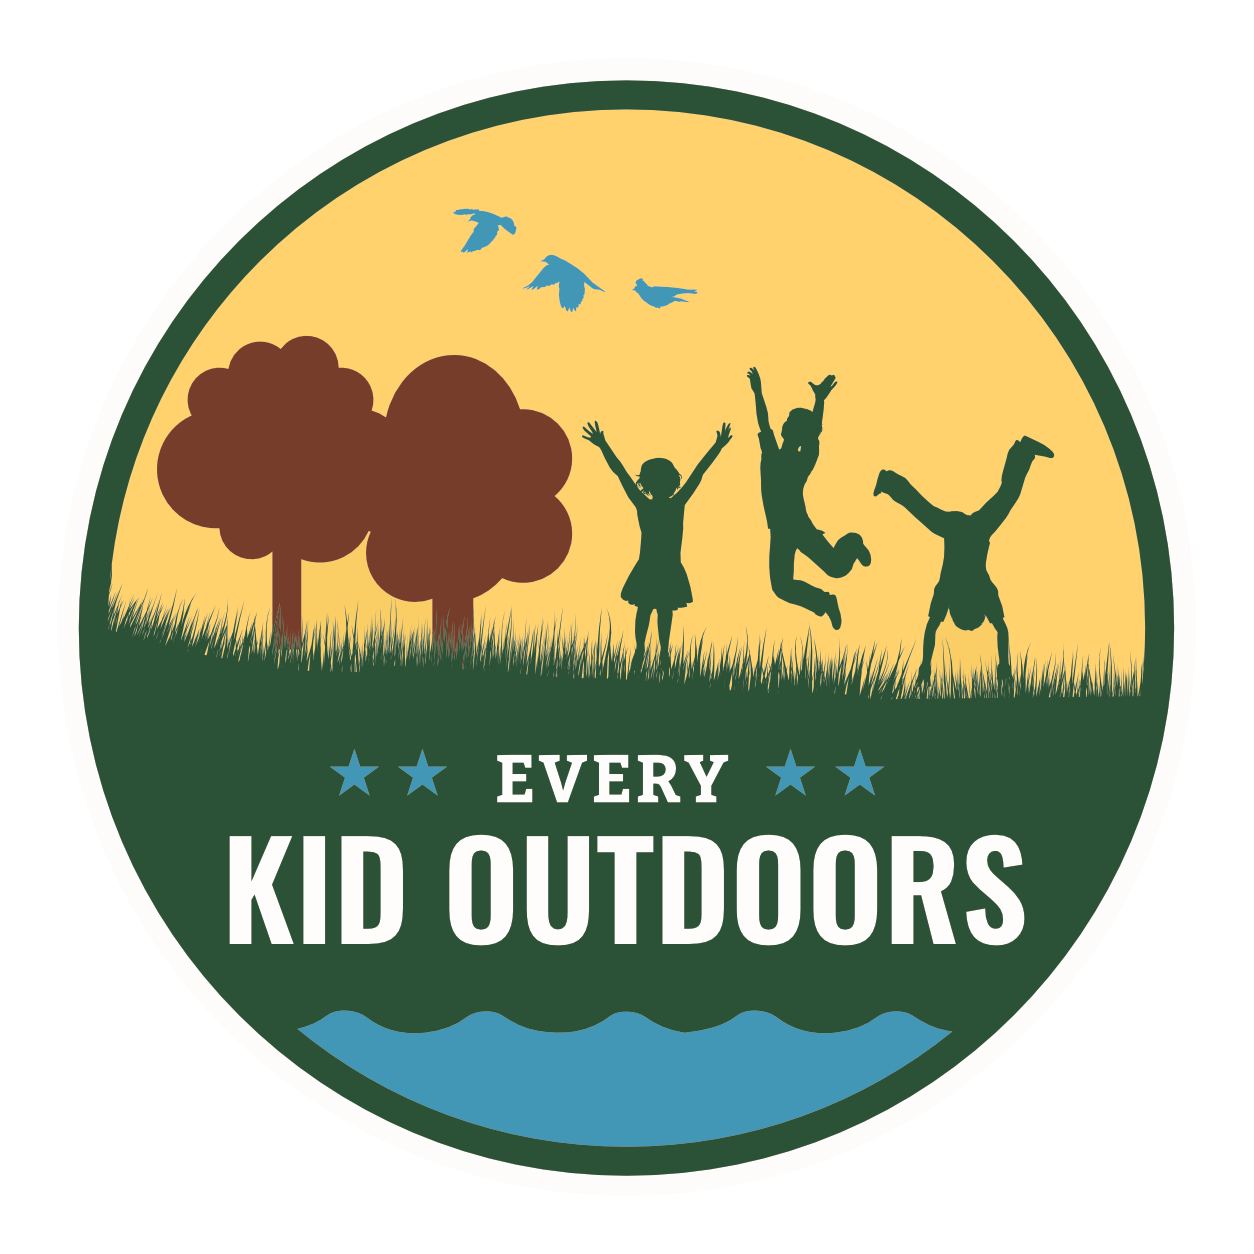 Graphic sillhouette of children playing in a park above the words "Every Kid Outdoors"